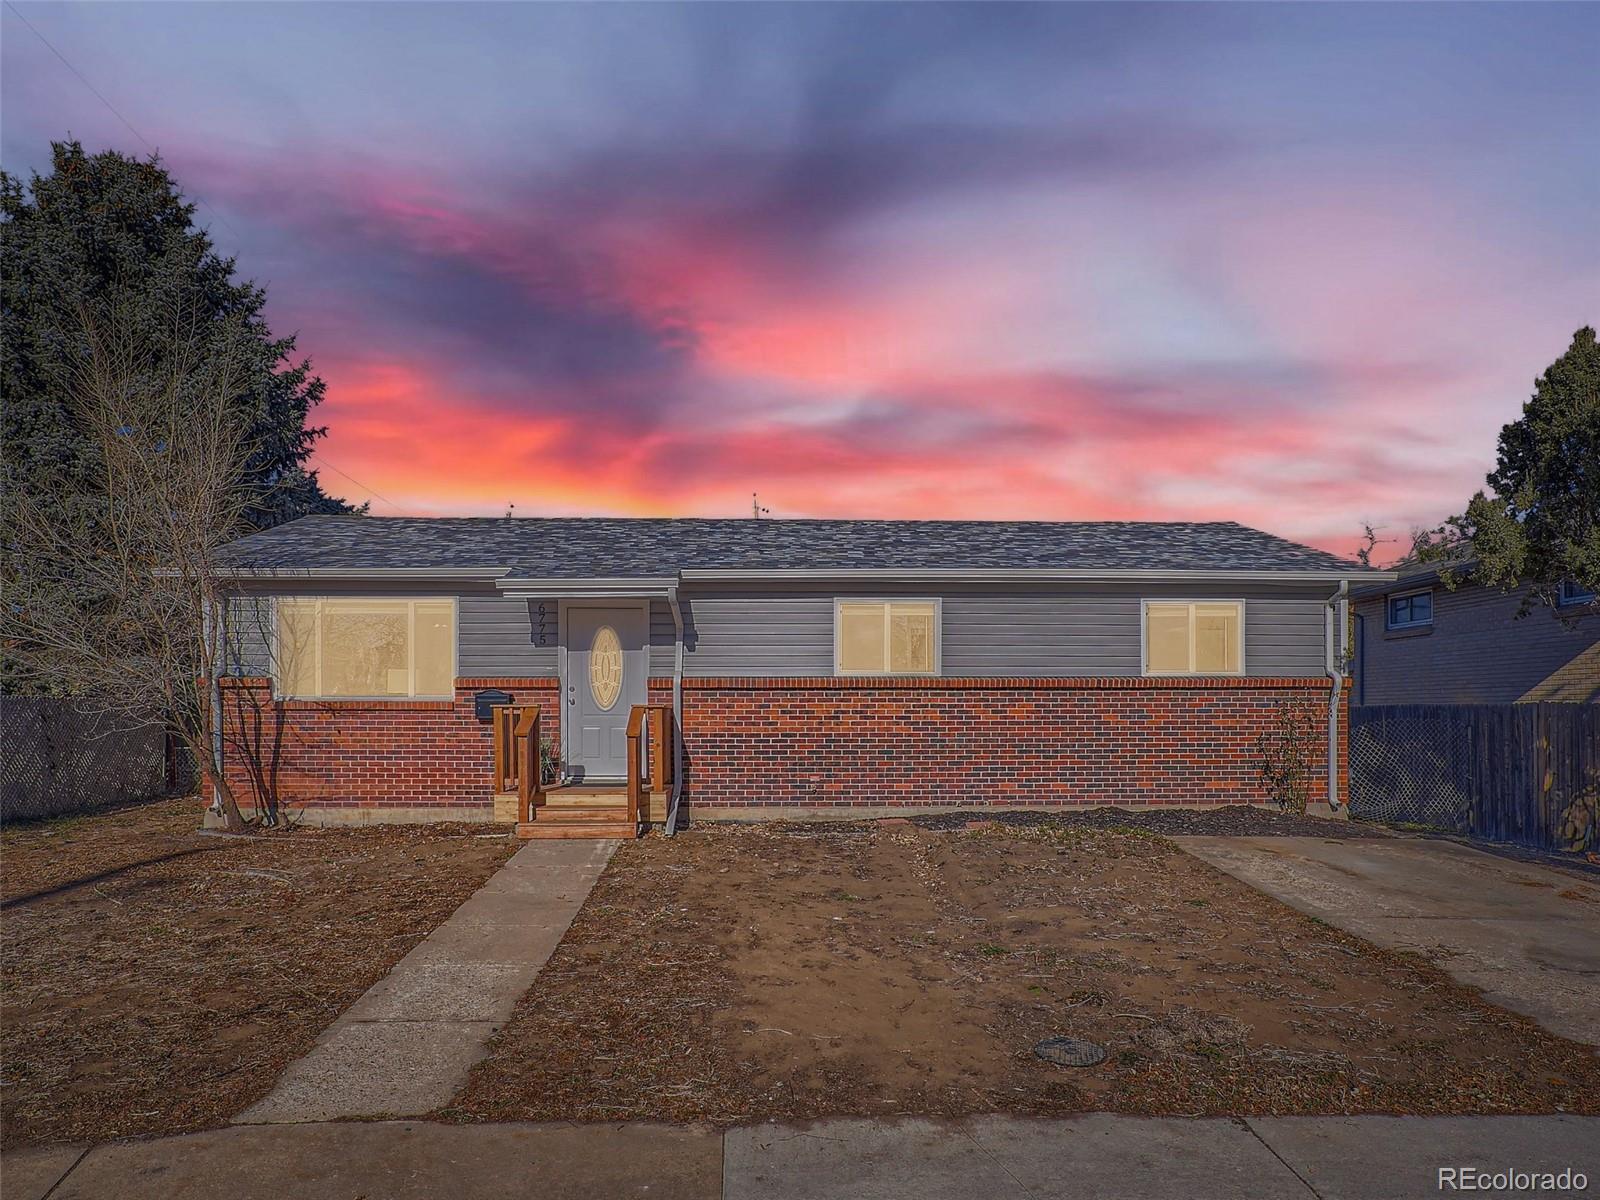 6775 W 54th Place, arvada MLS: 2526898 Beds: 3 Baths: 1 Price: $485,000